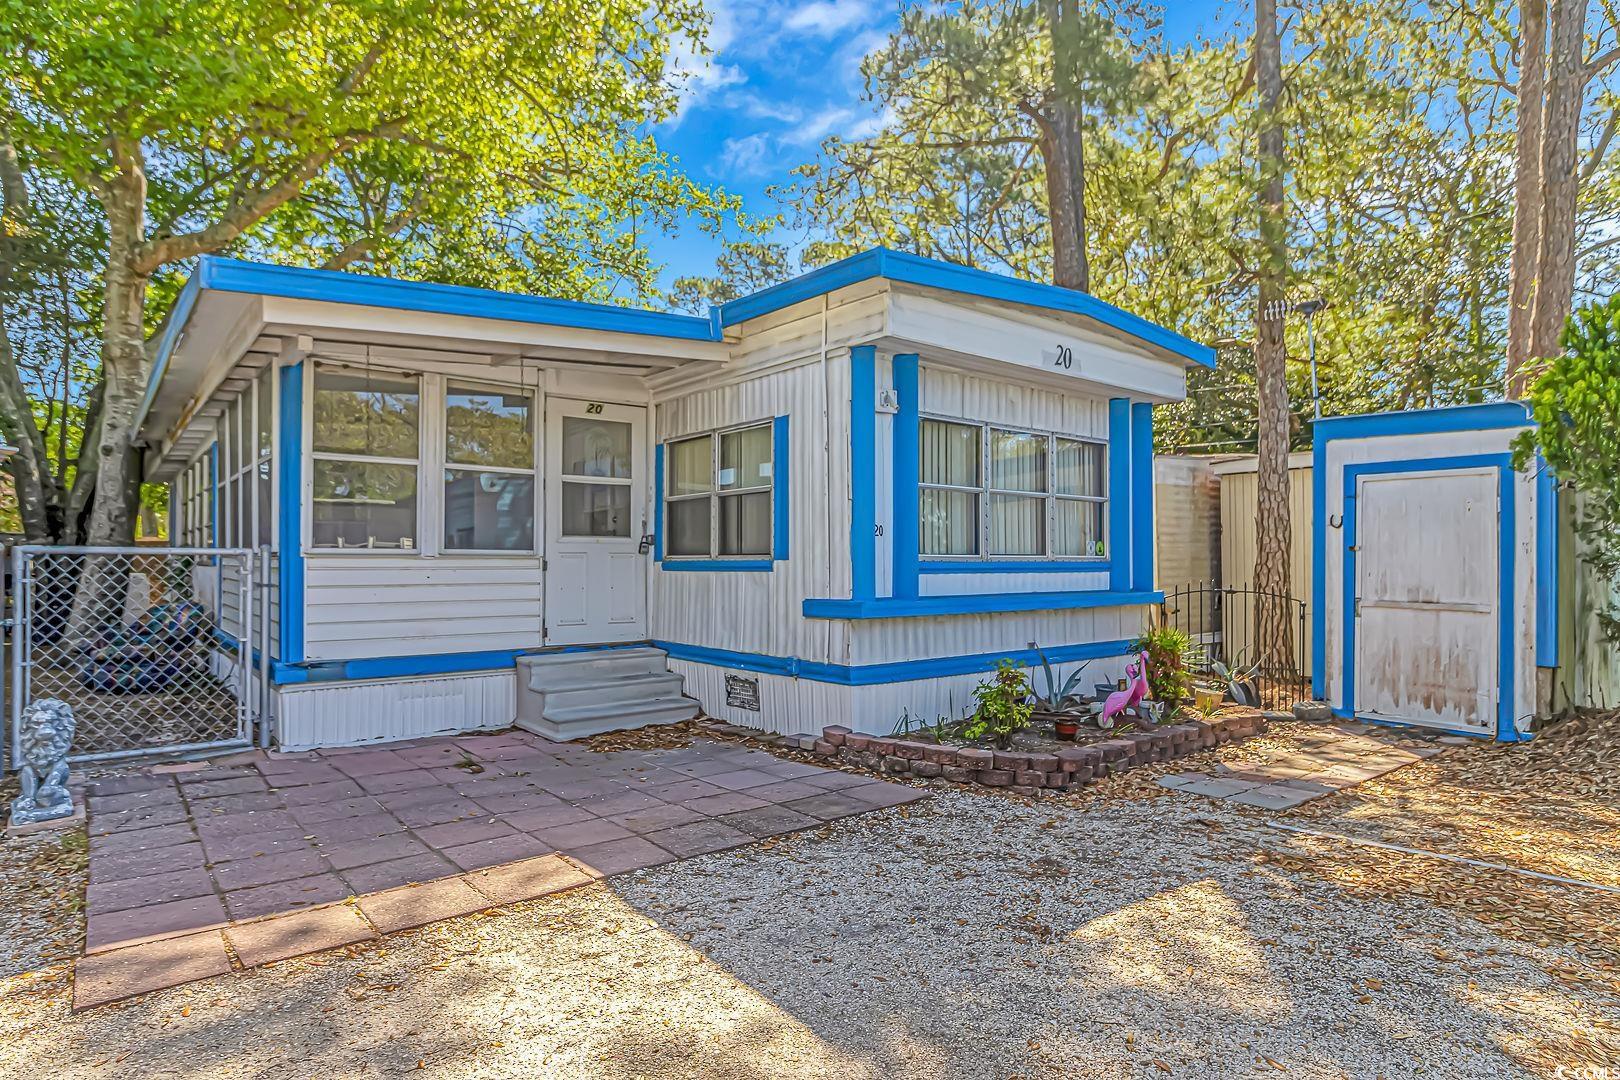 motivated seller. prime location, location, location, in the heart of north myrtle beach, east of hwy 17!!! this charming 2 bedroom/1 bathroom manufactured home on leased land is centrally located in the windy hill section of north myrtle beach. open the door to a tiled carolina room, then enter the property to an open concept living/dining/kitchen and fresh paint throughout. washer and dryer convey and are within the home. close to barefoot landing, restaurants & steps to the beach. lot lease includes: water, trash, sewer, cable & lawn maintenance. great vacation home, primary residence or rental property! won't last long, schedule a showing appointment today! all measurements are not guaranteed, buyer responsible for verifying.